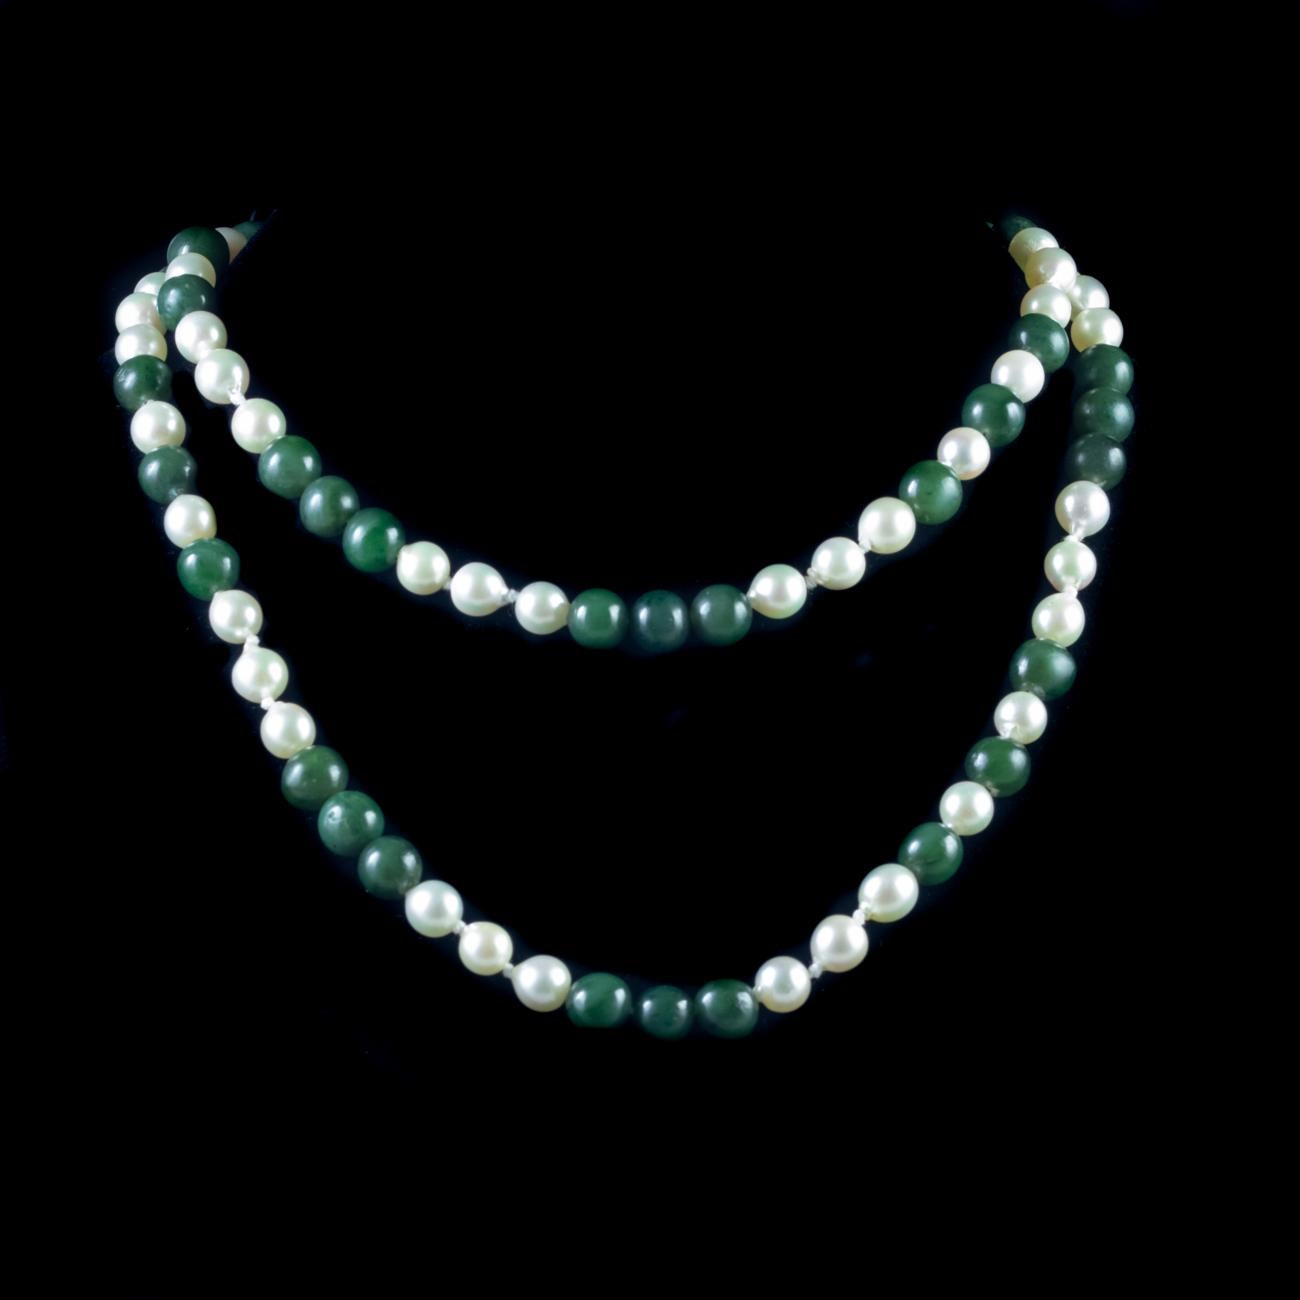 This stunning necklace features alternating sections of beautiful Jade and Pearl beads and is of a similar style to a necklace worn in the popular film adaptation of the TV series Downton Abbey.

Jade is considered the ultimate ‘Dream Stone’ and has